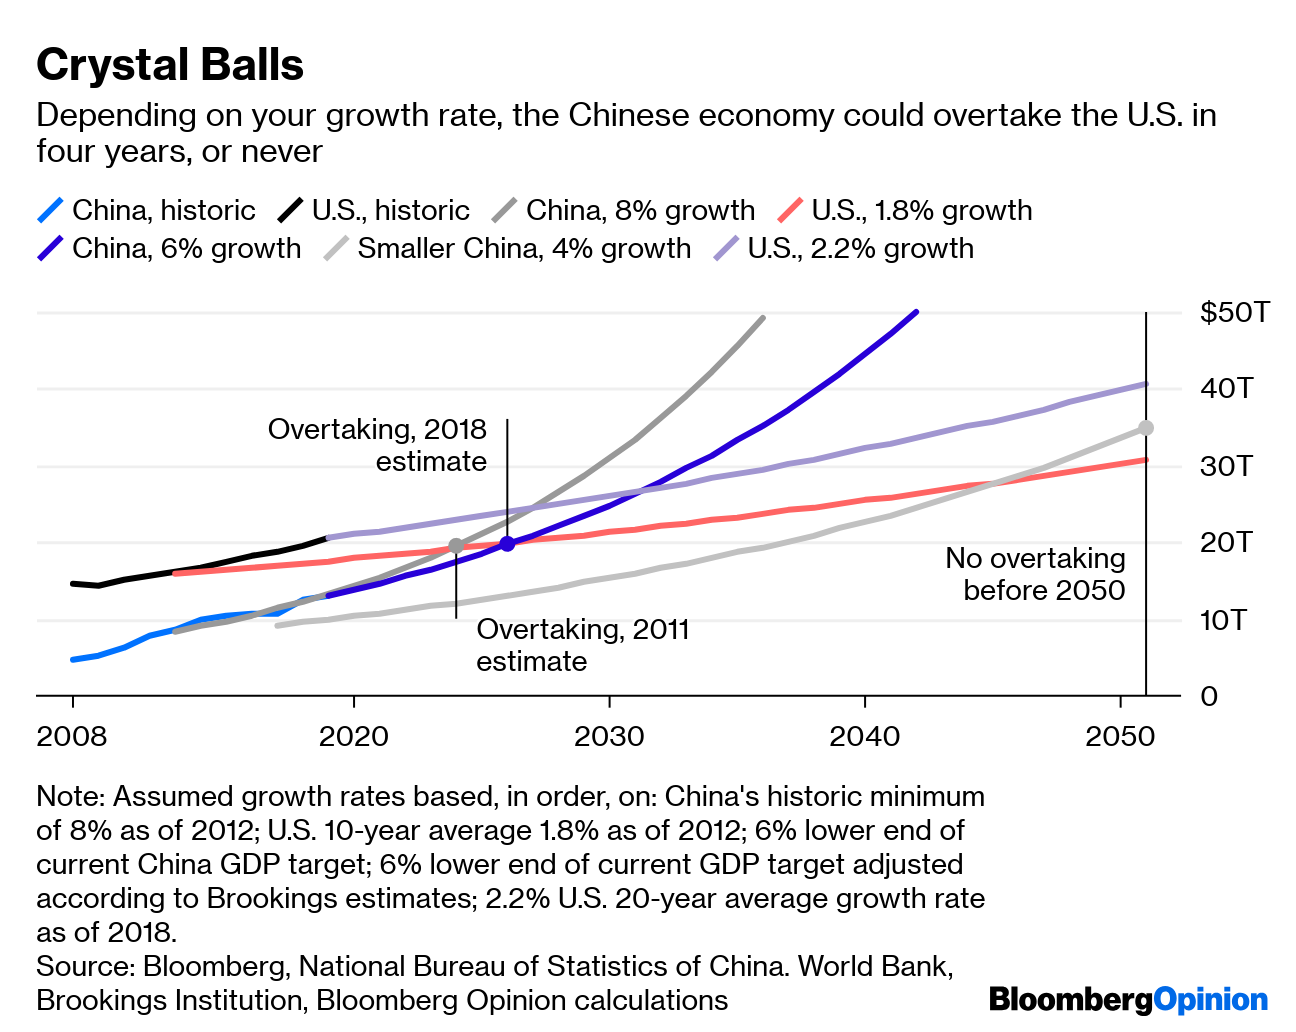 Will China Overtake U.S. GDP? Depends How You Count Bloomberg